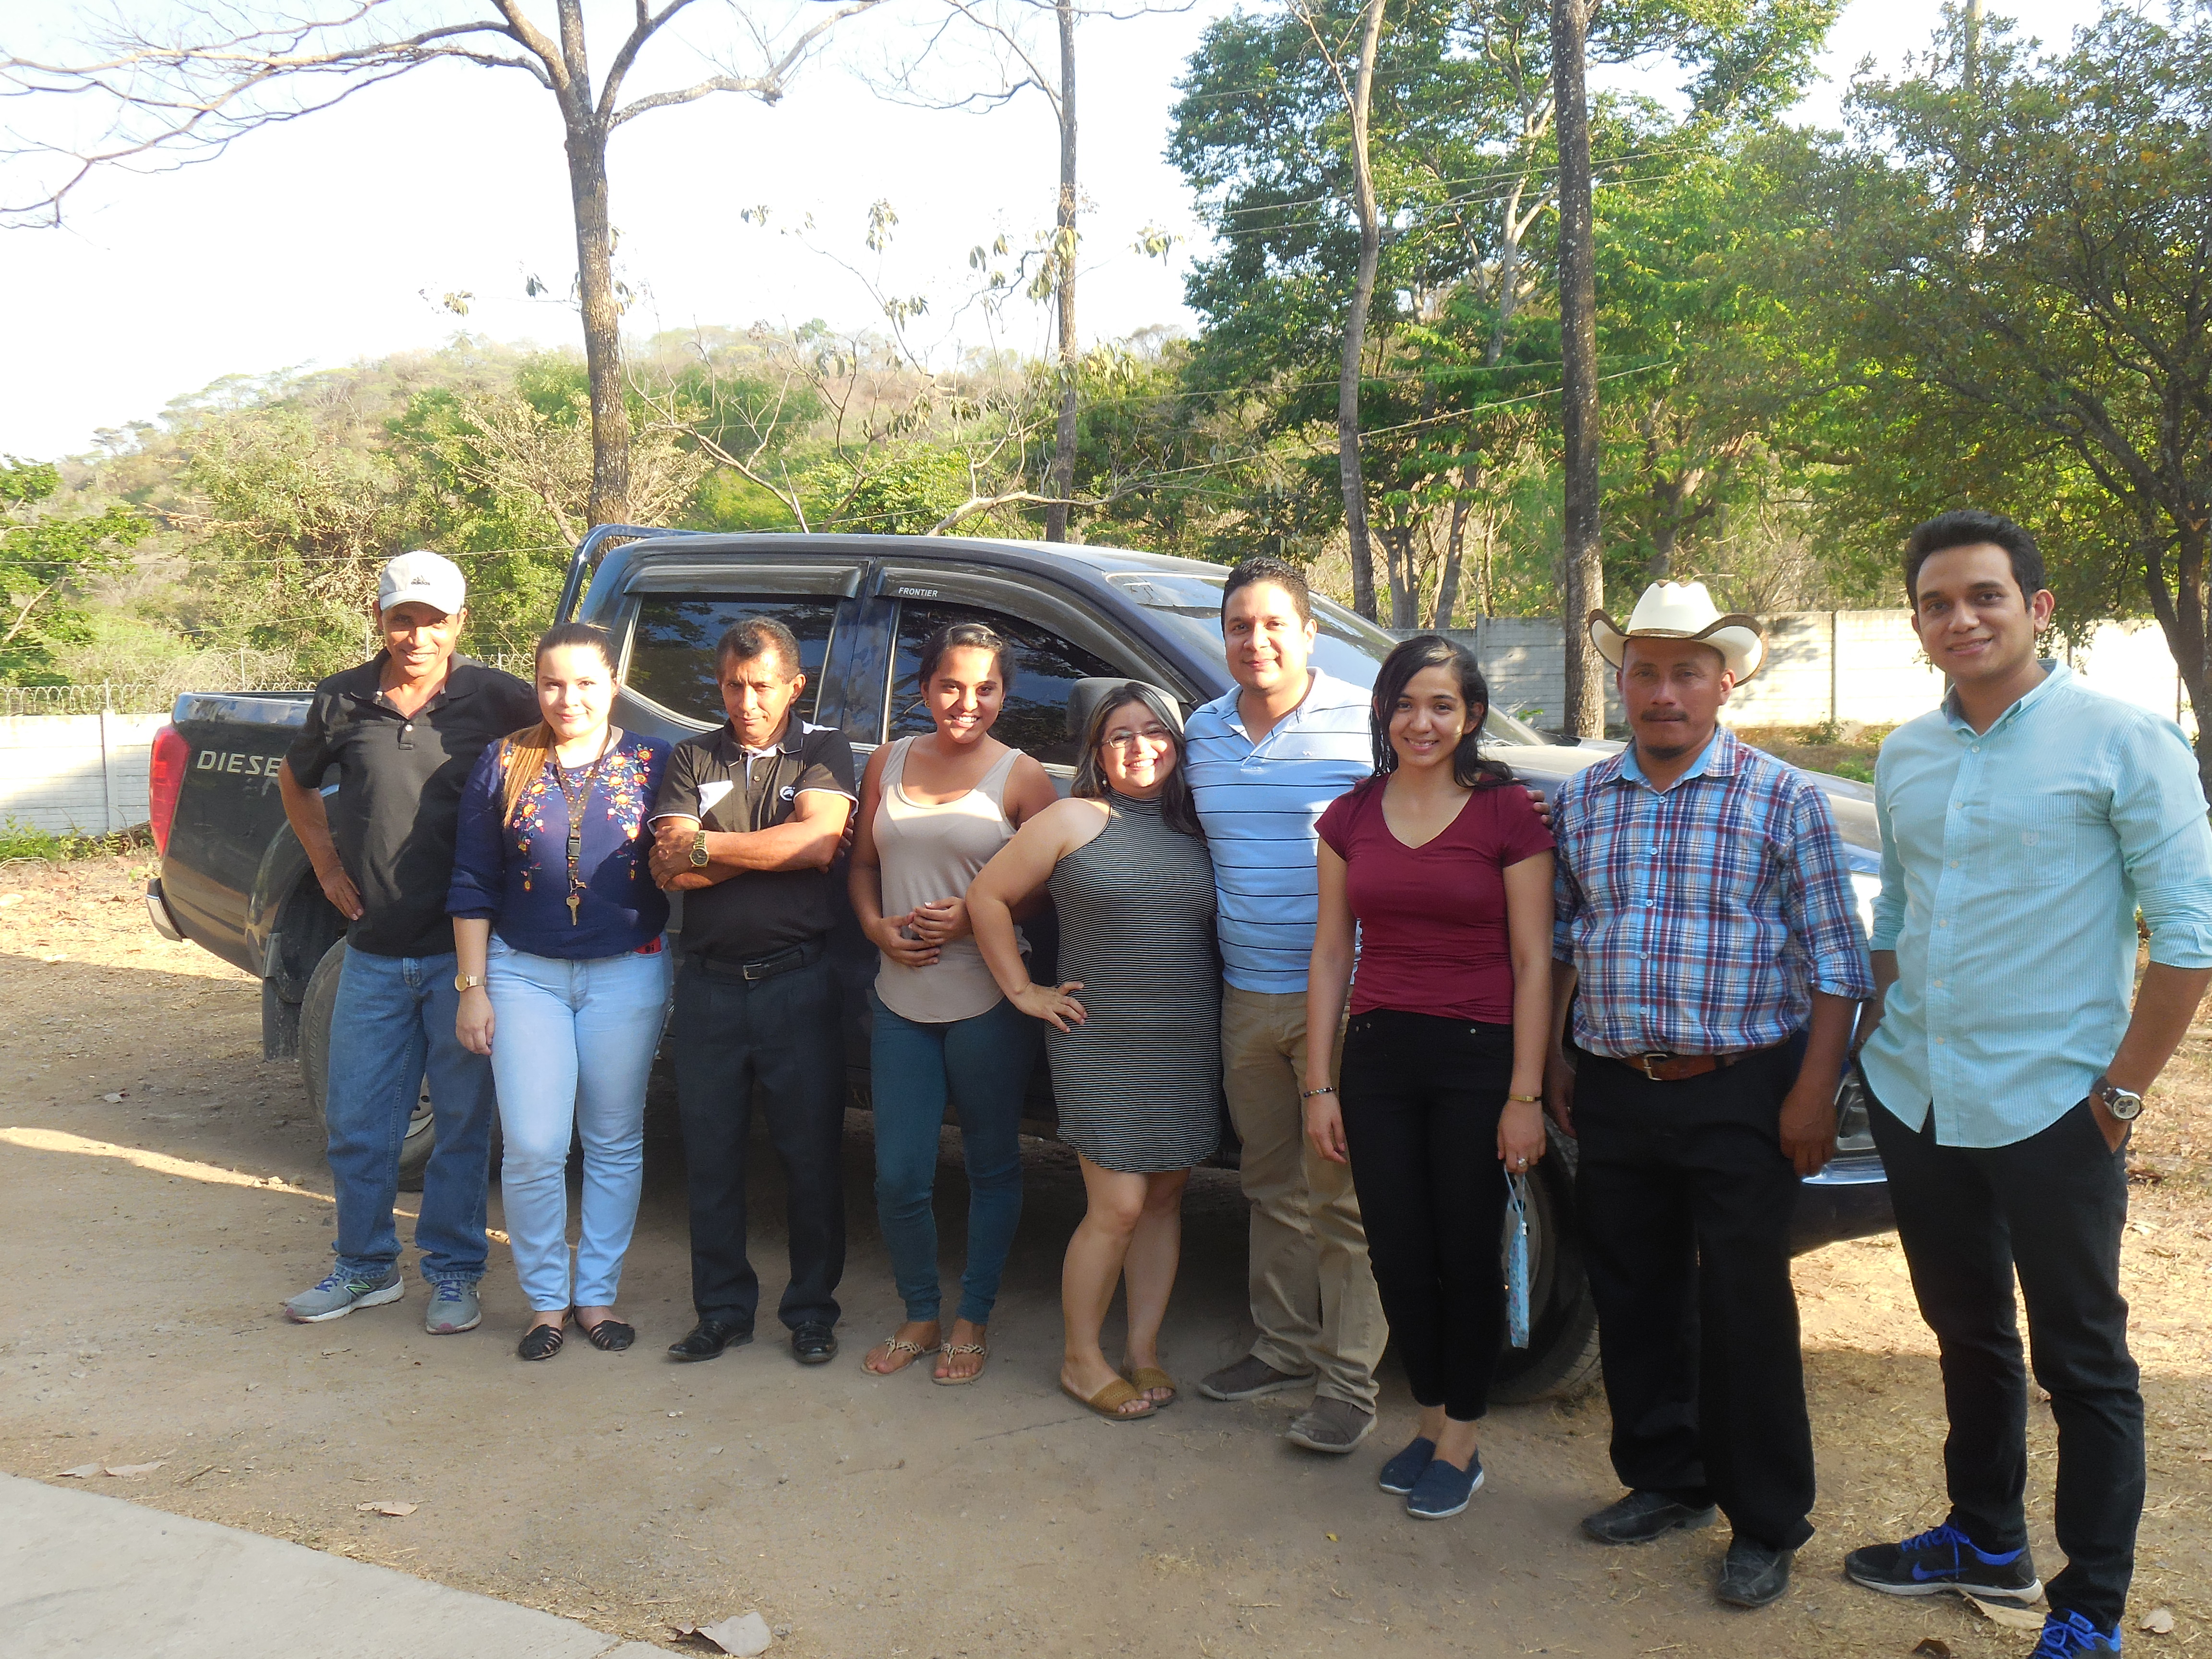 Clinic staff:  Dr. Aaron (far right); Dr. Marco (4th from the right)